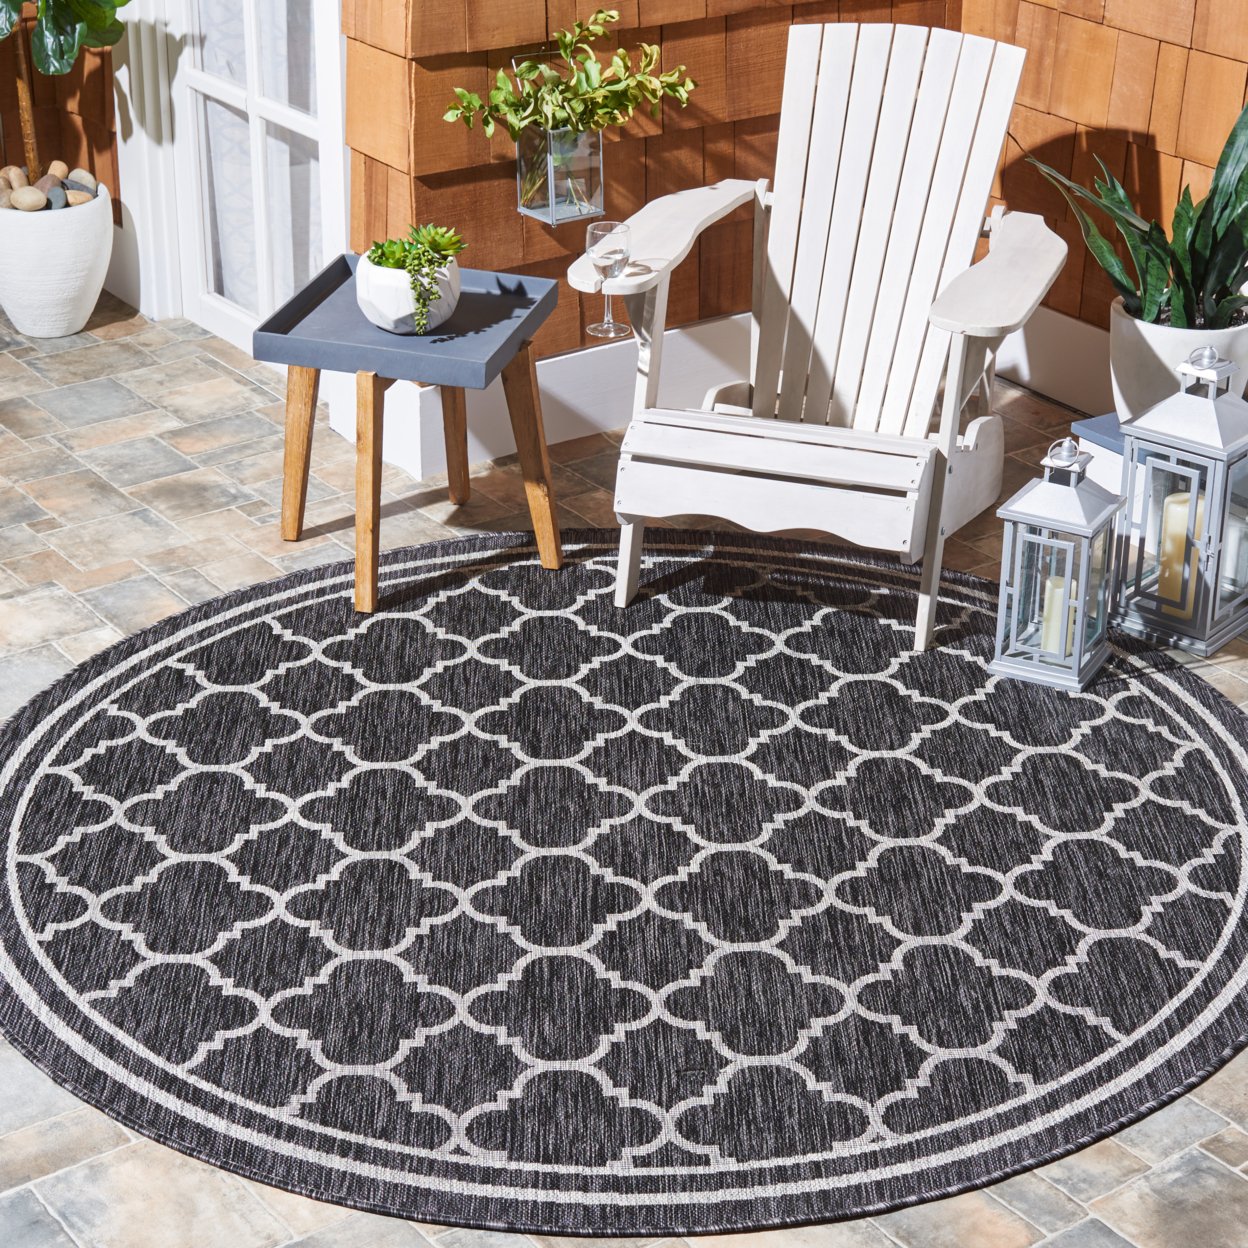 SAFAVIEH Outdoor CY8918-37621 Courtyard Black Charcoal Rug - 6' 7 Round